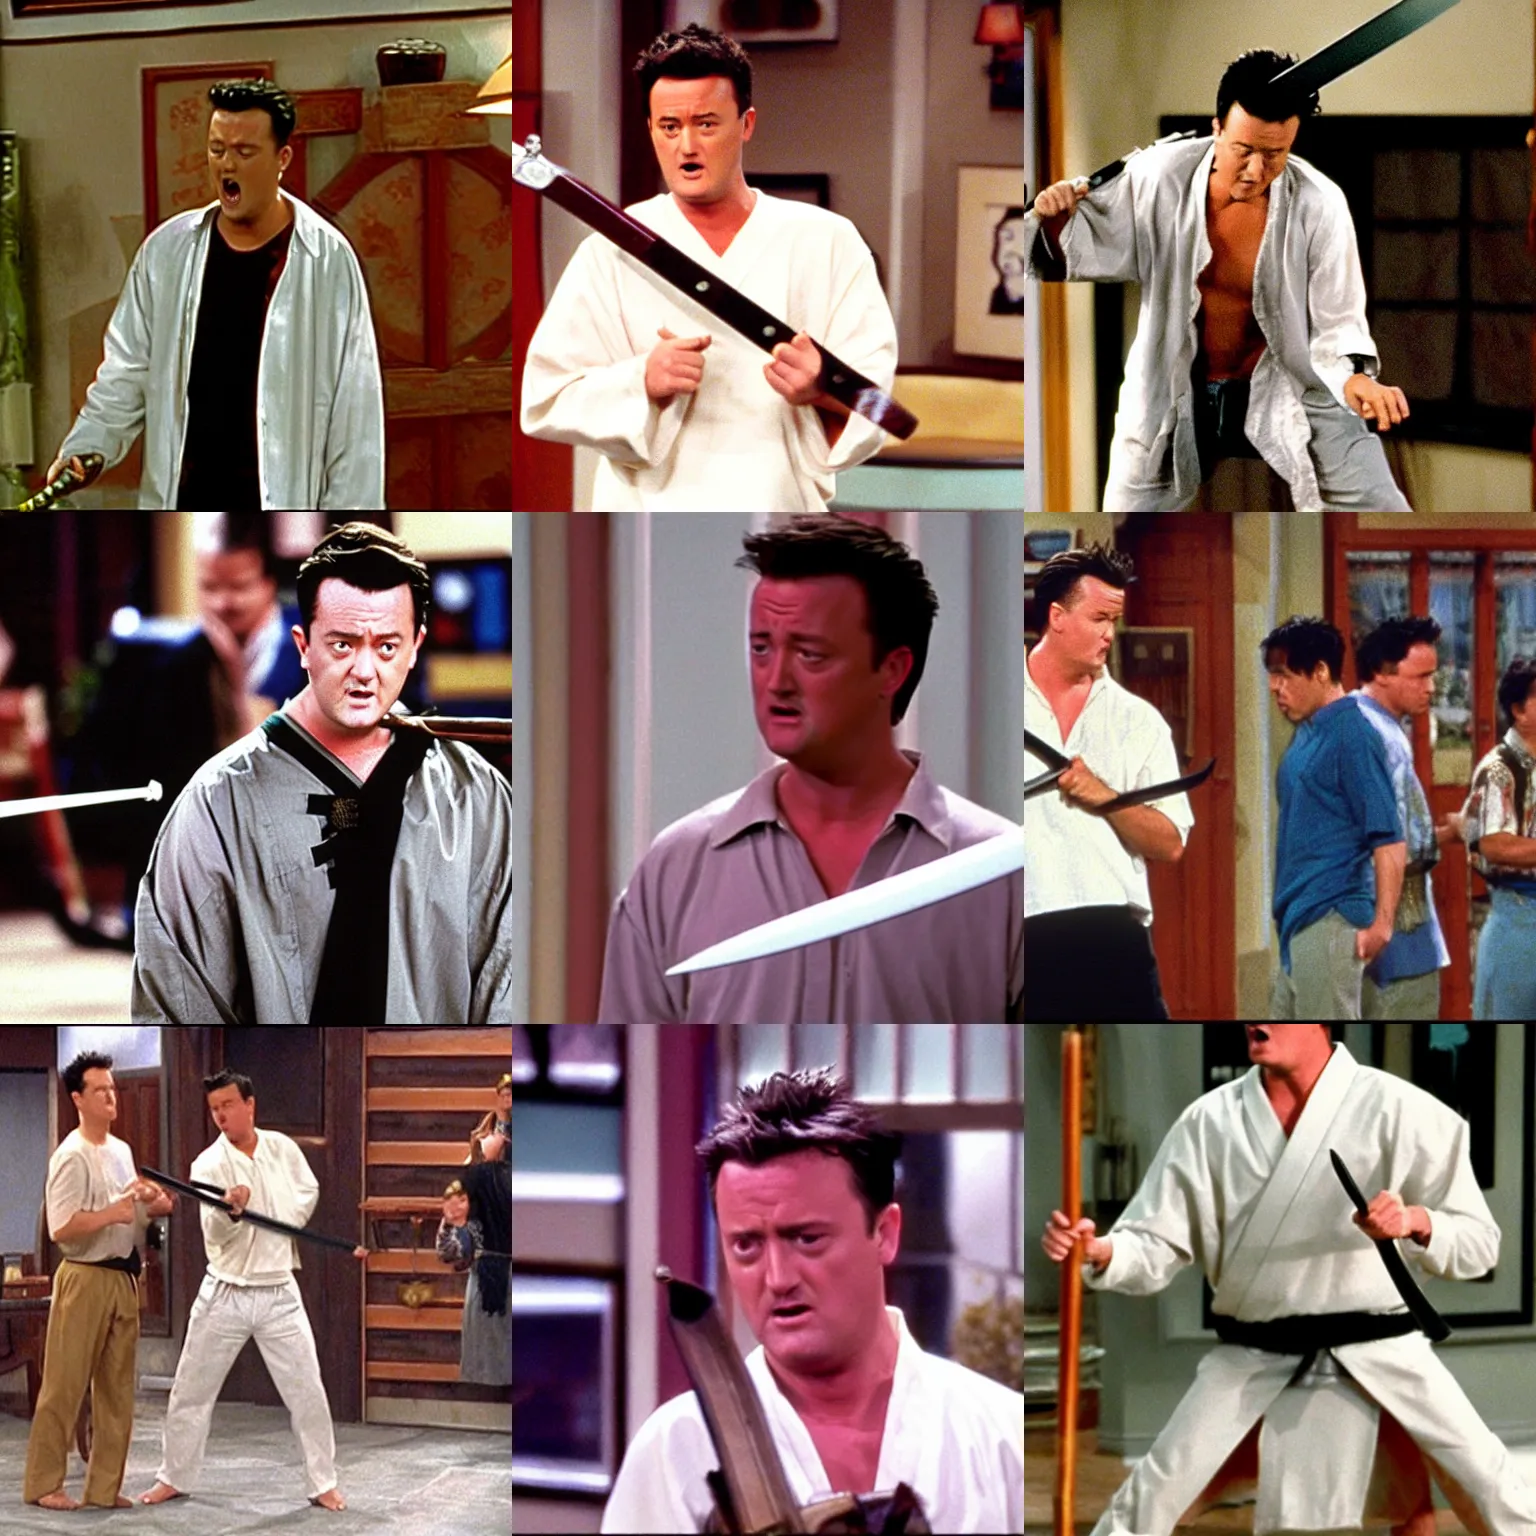 Prompt: chandler bing extremely angry wearing white y - fronts holding a samurai sword,'friends'9 0 s tv show screenshot